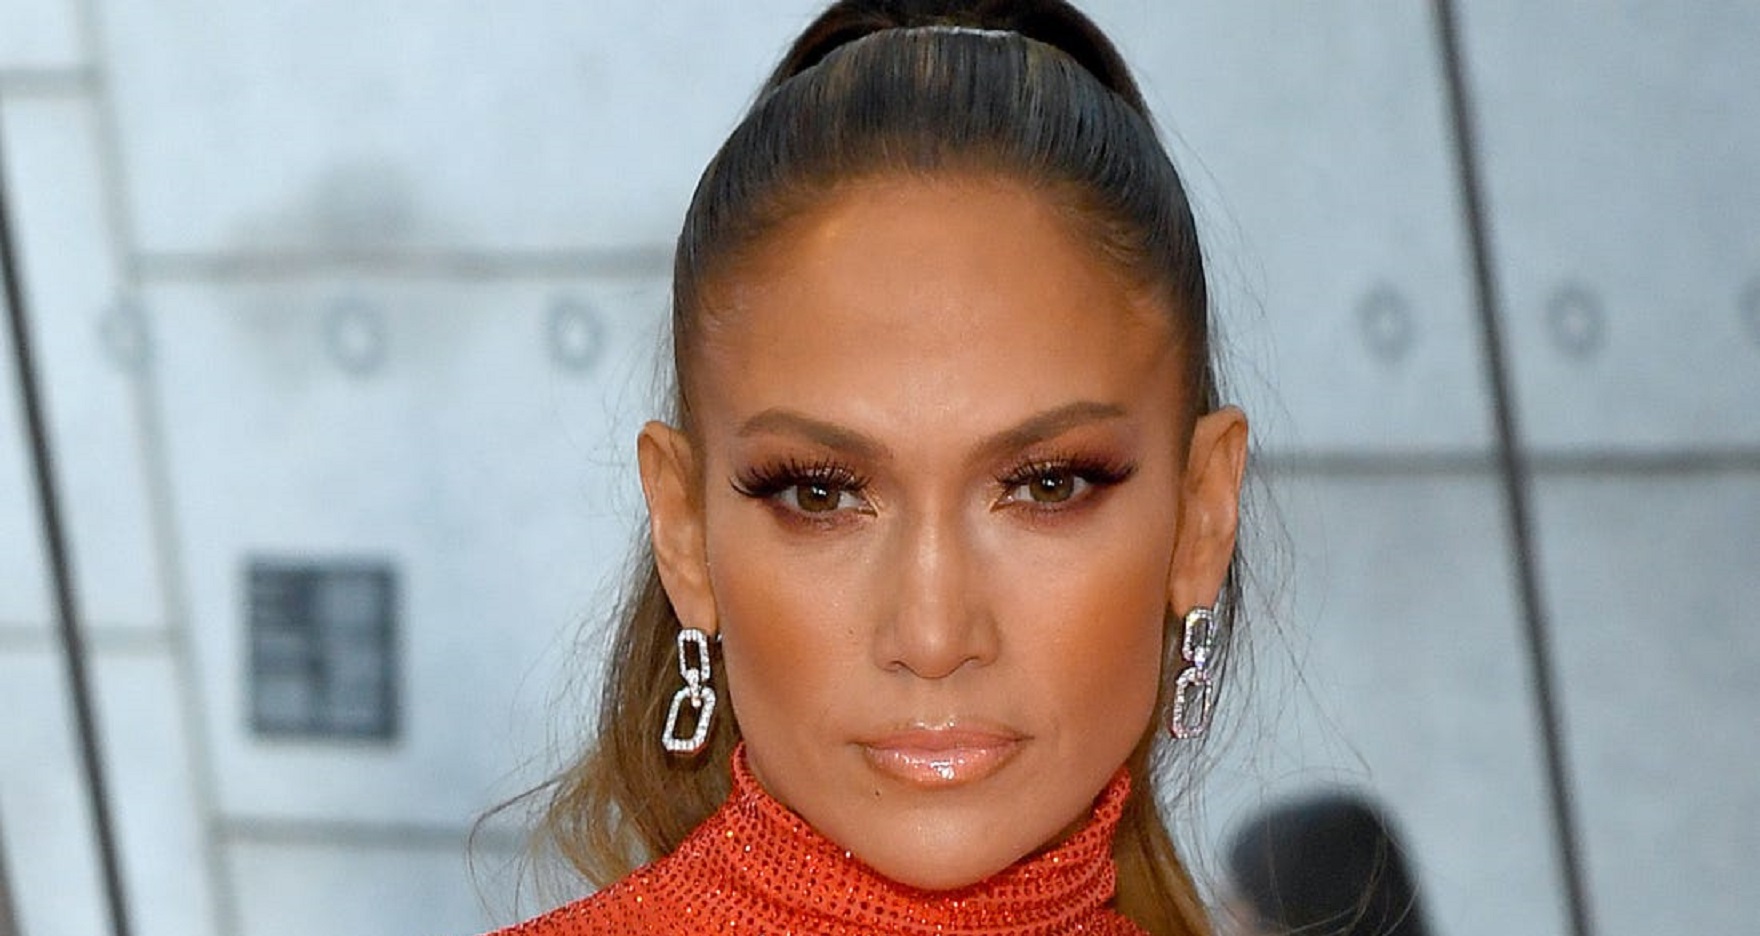 Jennifer Lopez Says She’s Never Done Botox, “I’m Not That Person”